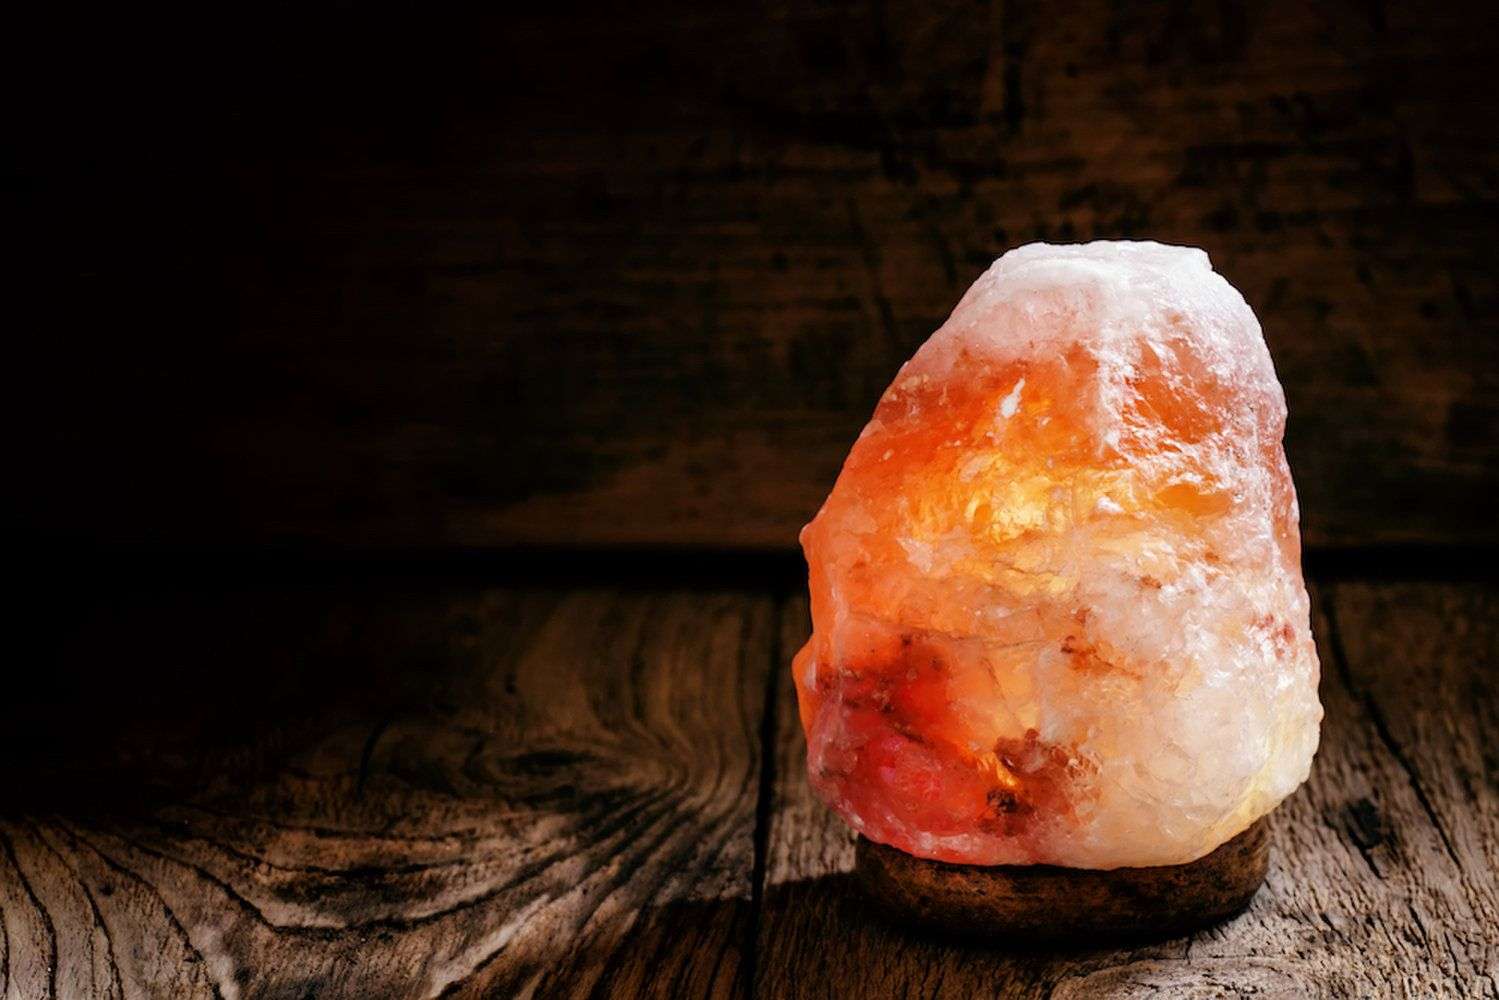 Himalayan Salt Lamps: What Are They (and Do They Really Work)?